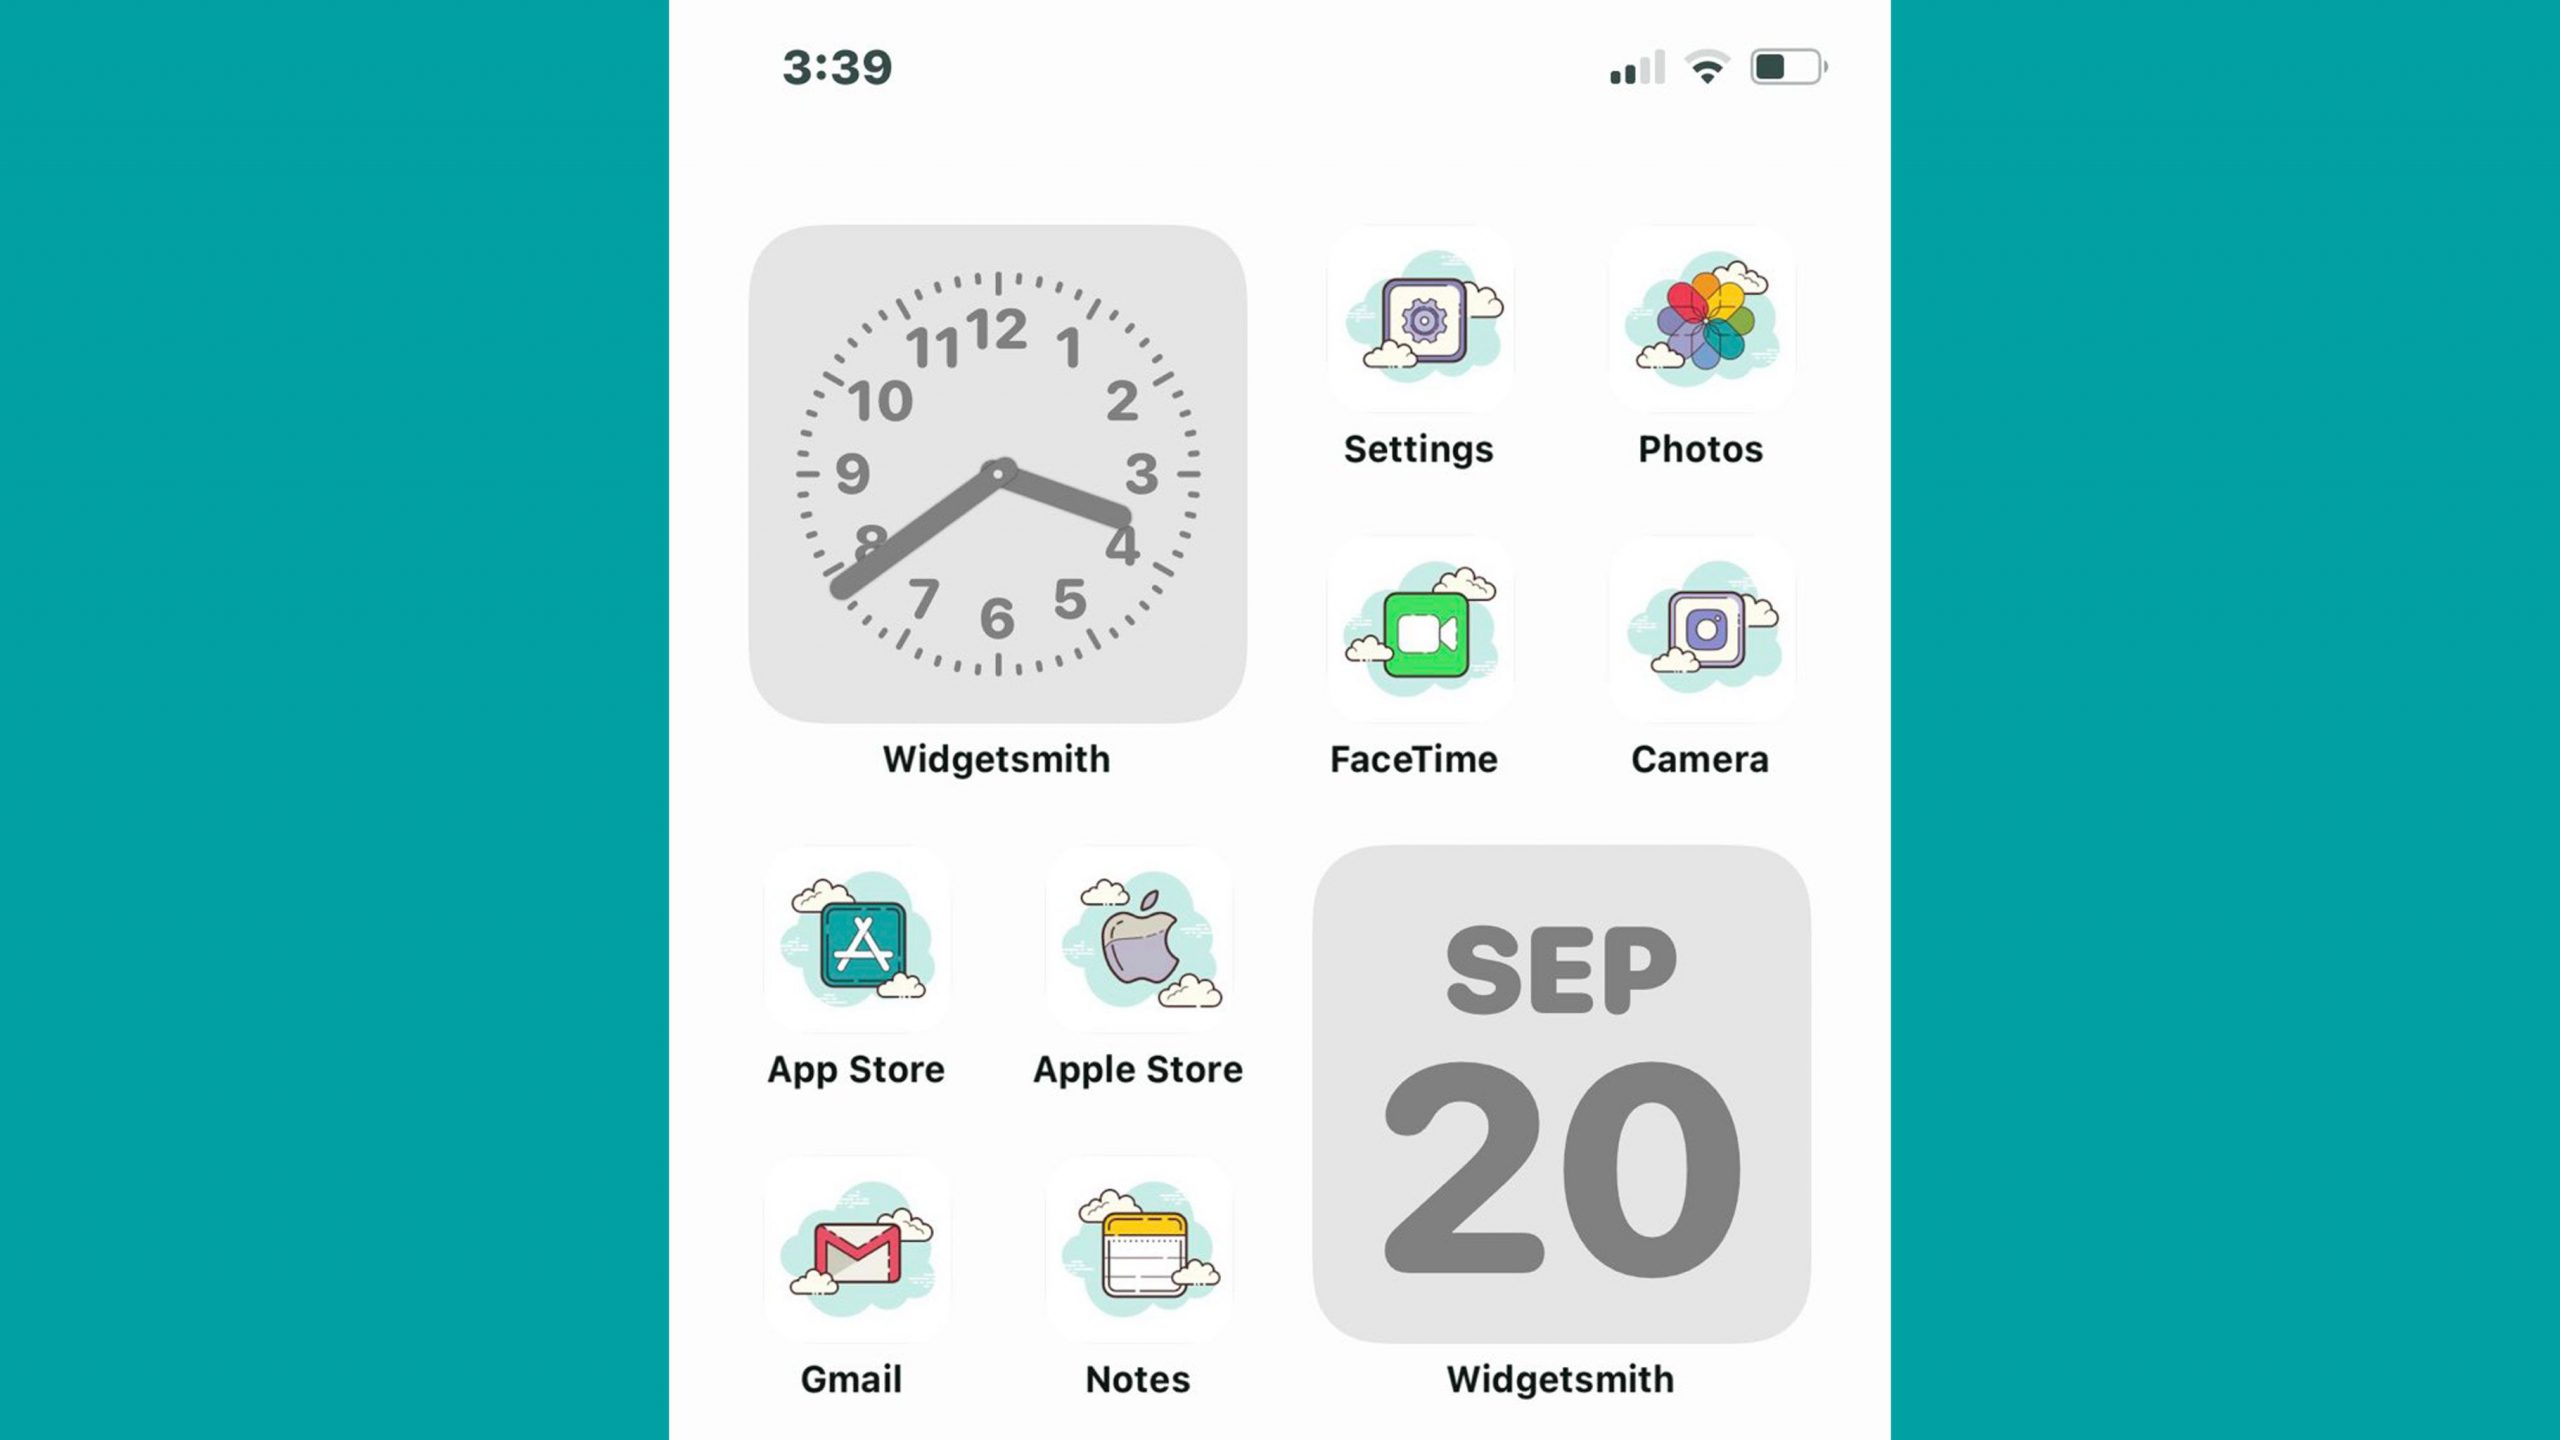 iOS 14 Widgets offers creative home screen ideas for iPhone users

